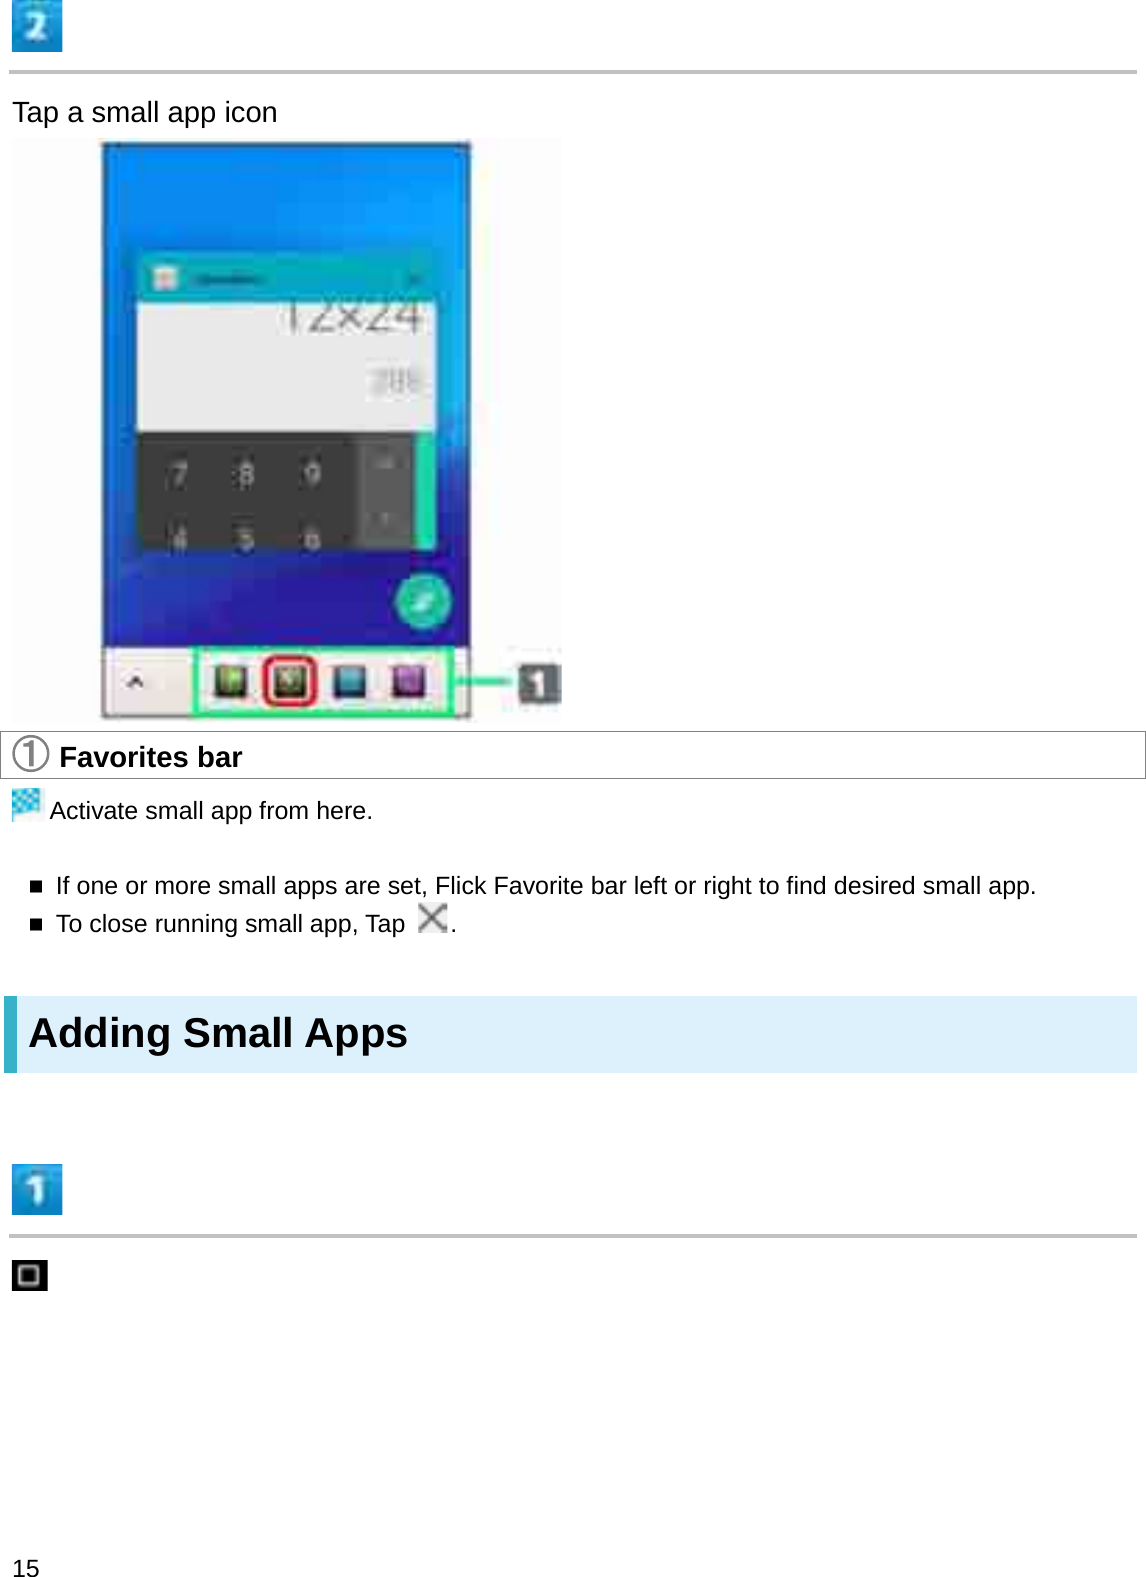 Tap a small app icon䐟䐟Favorites barActivate small app from here.If one or more small apps are set, Flick Favorite bar left or right to find desired small app.To close running small app, Tap  .Adding Small Apps15